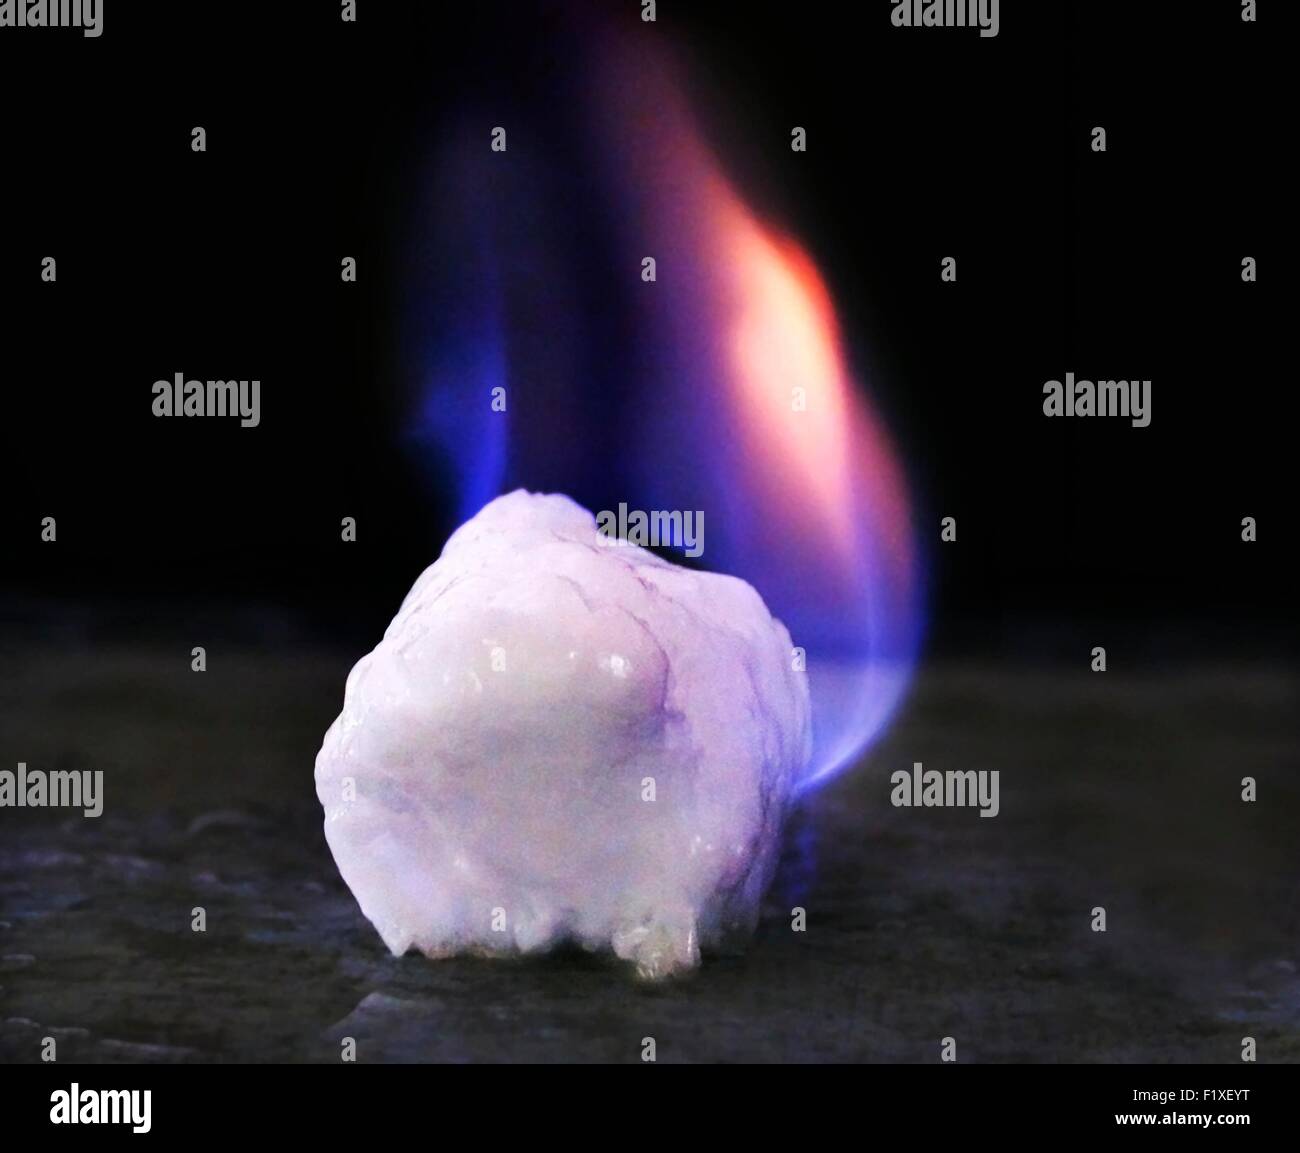 A burning chunk of methane hydrate believed to be the future of energy. Methane hydrate is found in large quantities below permafrost and the oceans around the world. Stock Photo